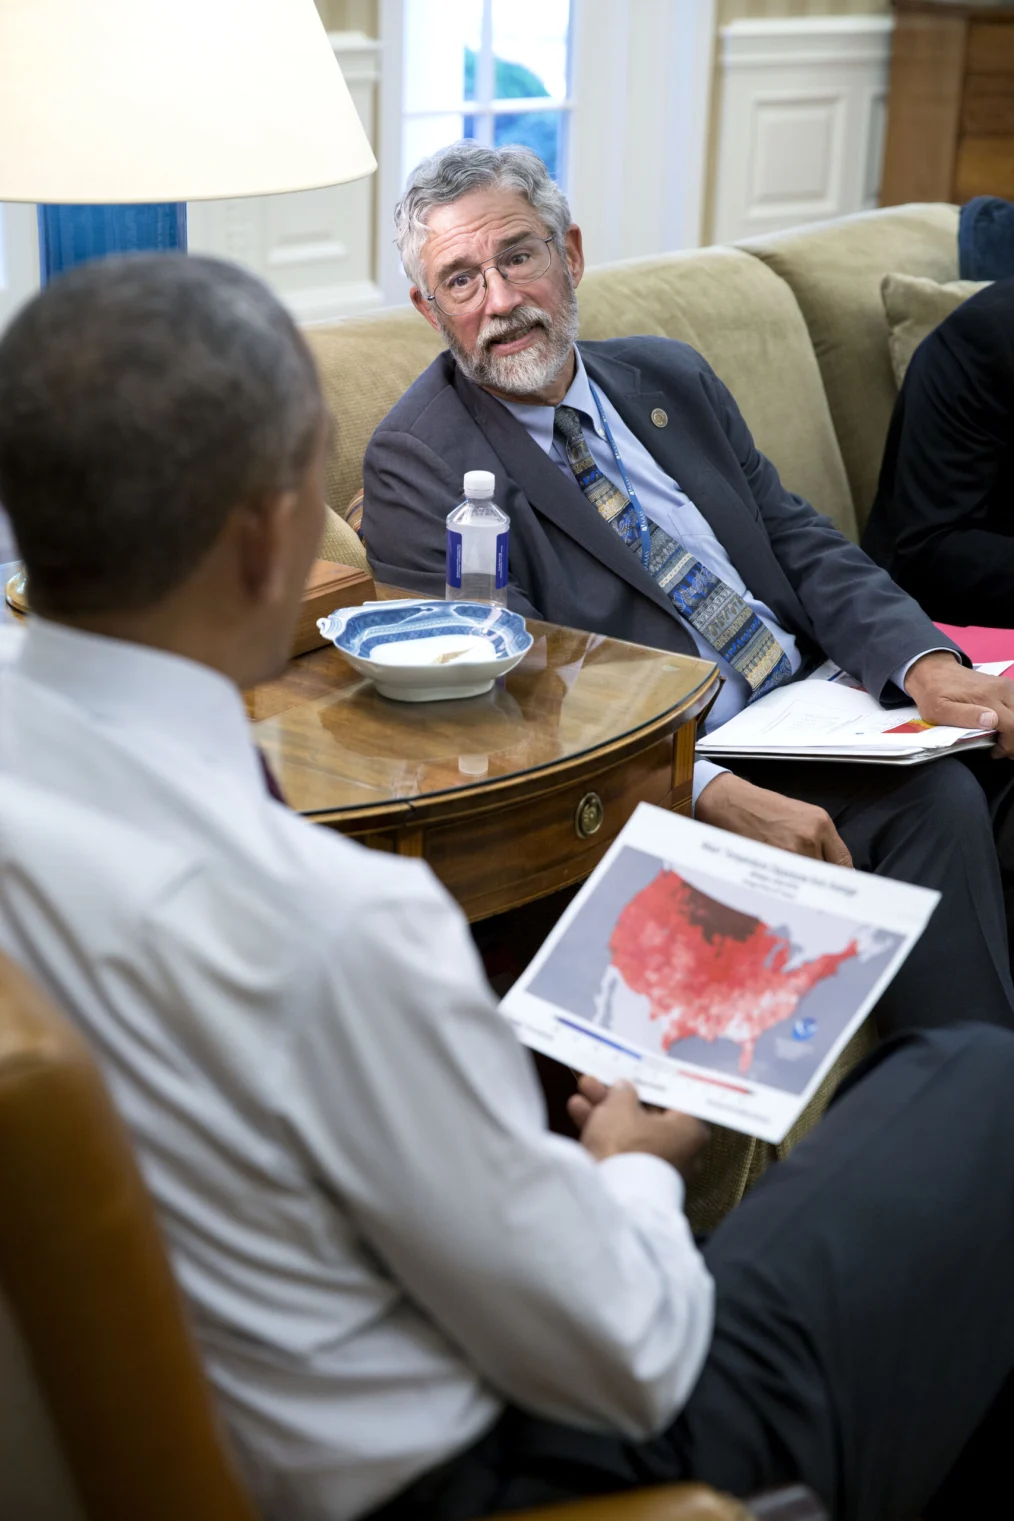 The camera focuses on an older man with a light skin tone and short, gray hair and glasses sitting on a couch in business attire. He is in the middle of a conversation with President Obama as President Obama sits in front of him holding a map in red. 